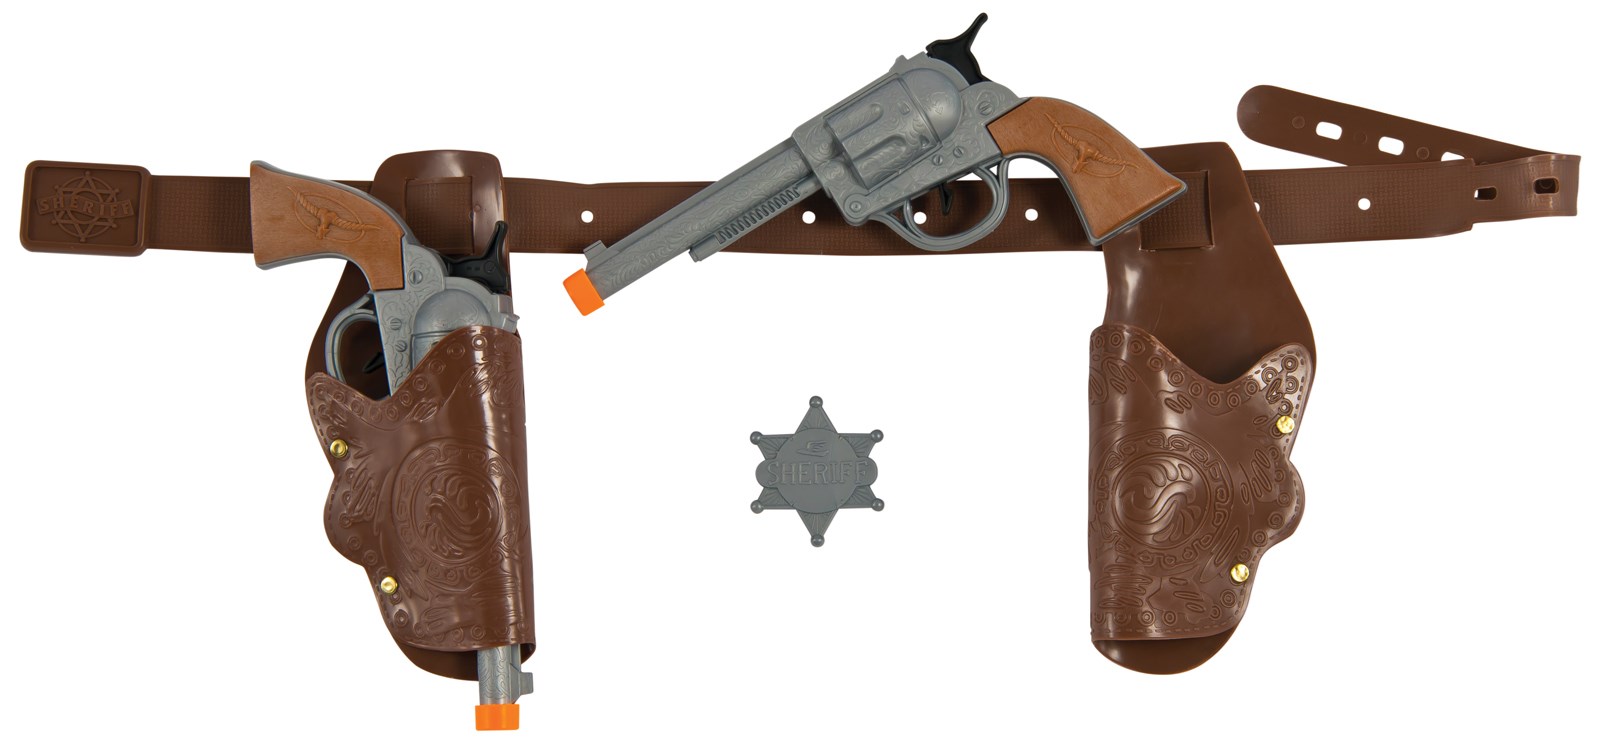 Authentic Western Gunman Belt Holster Adult for the 2022 Costume season.